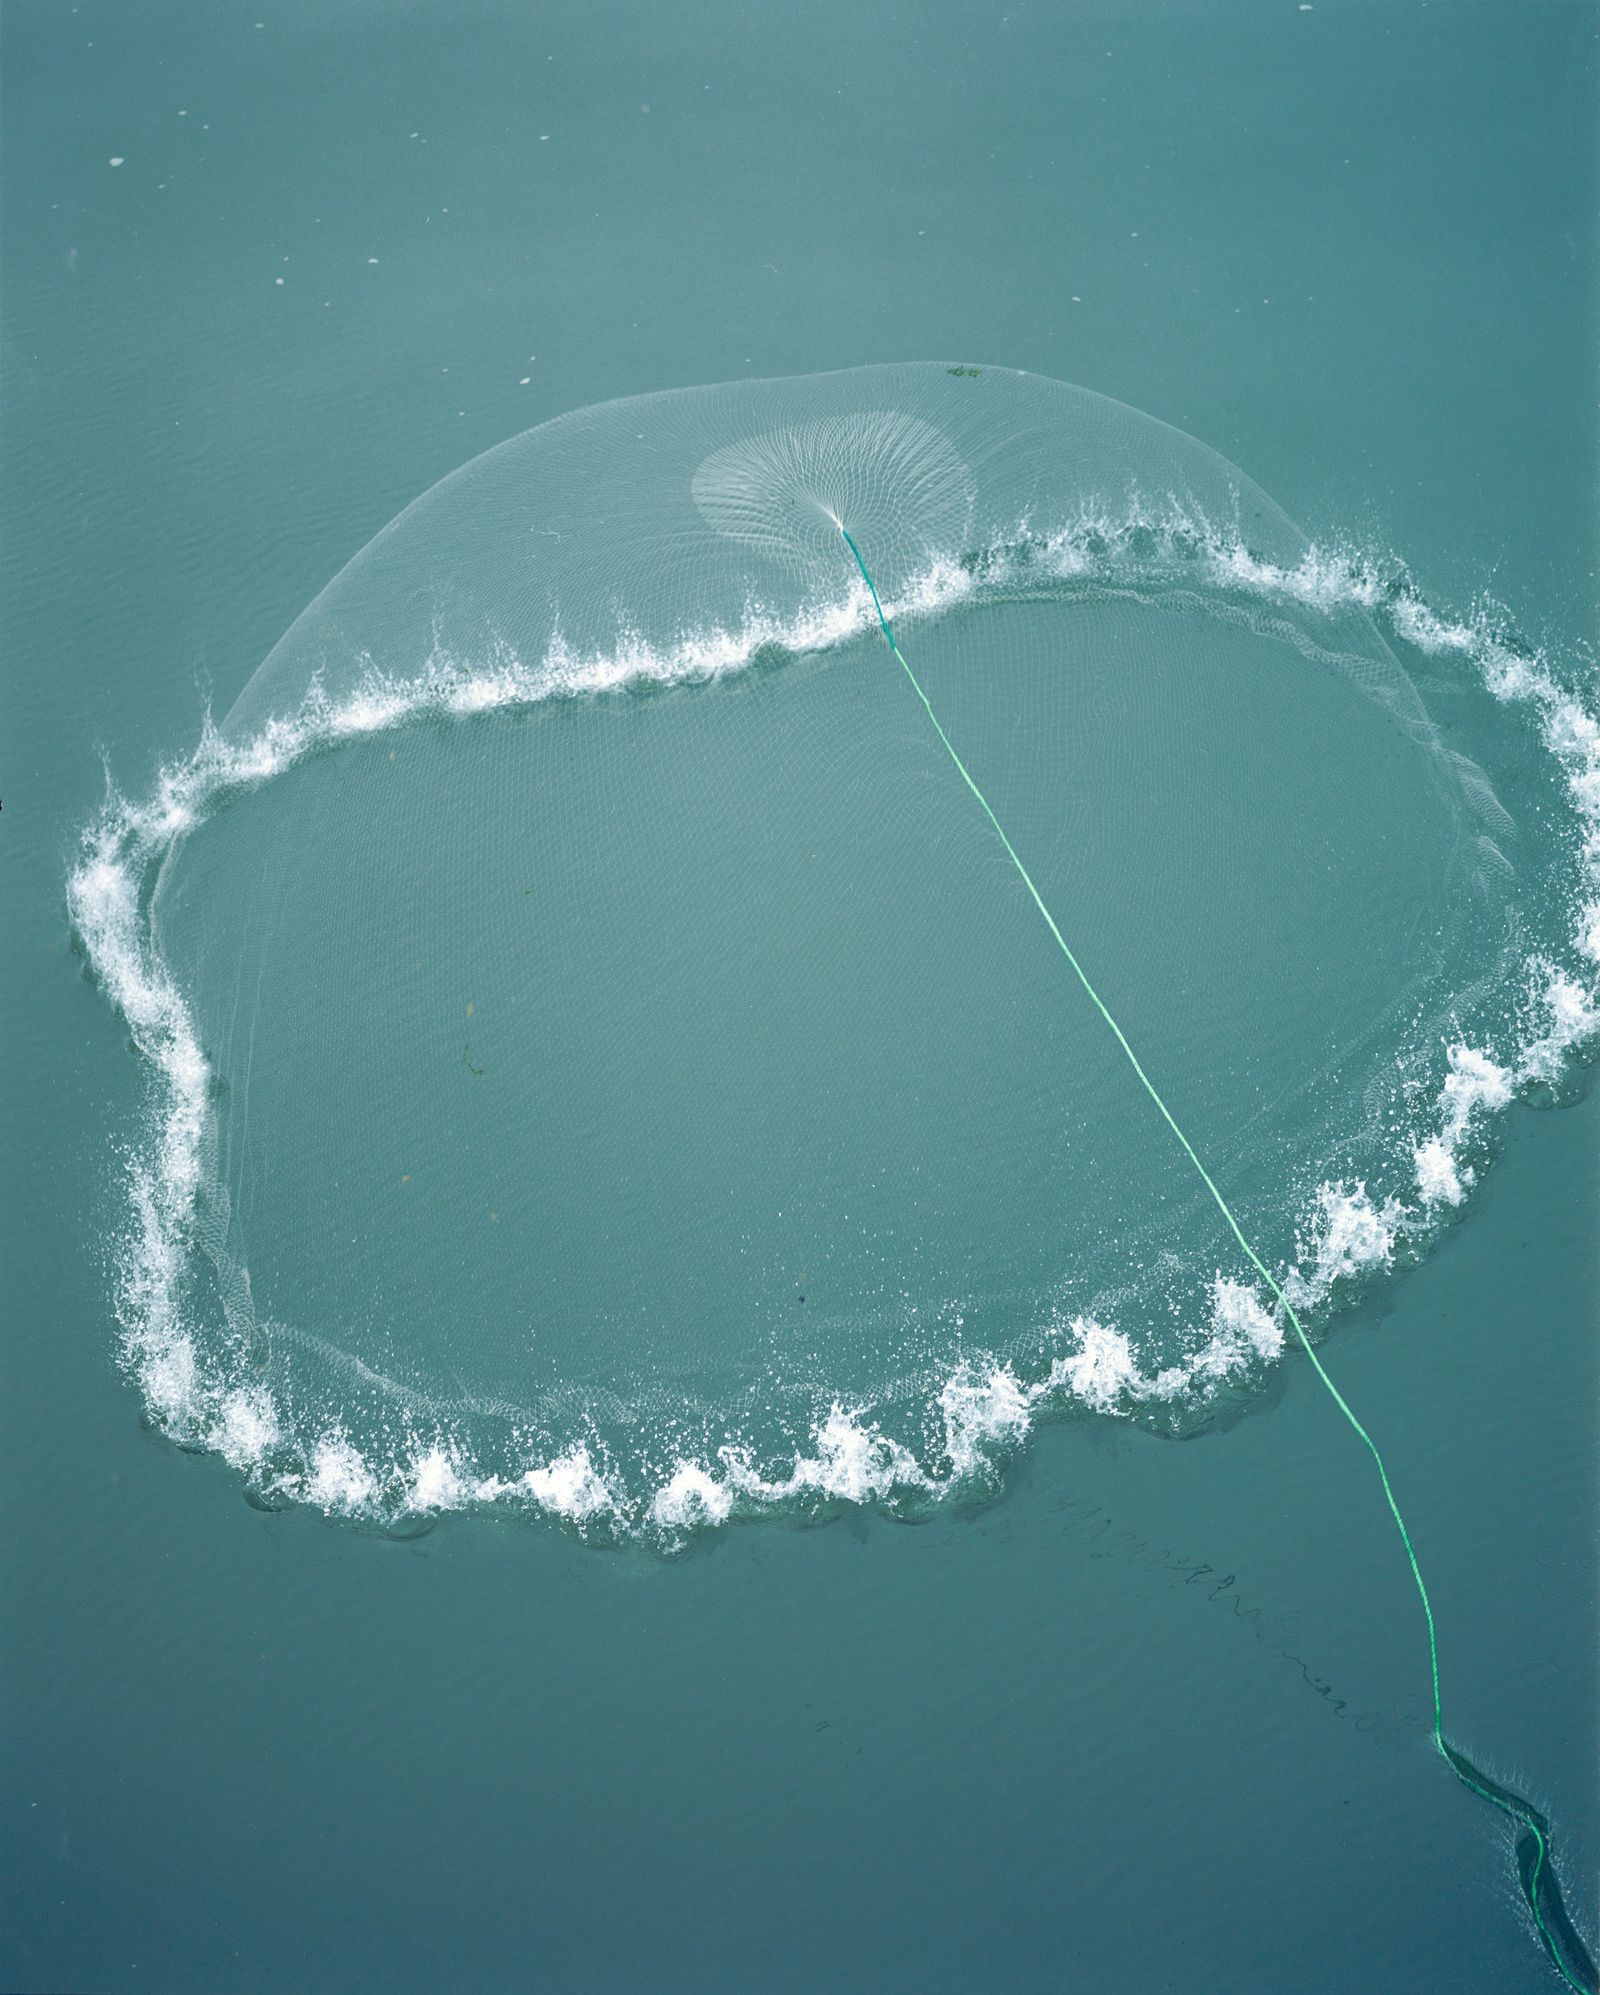 © Tianxi Wang - Image from the So long, and thanks for all the fish photography project